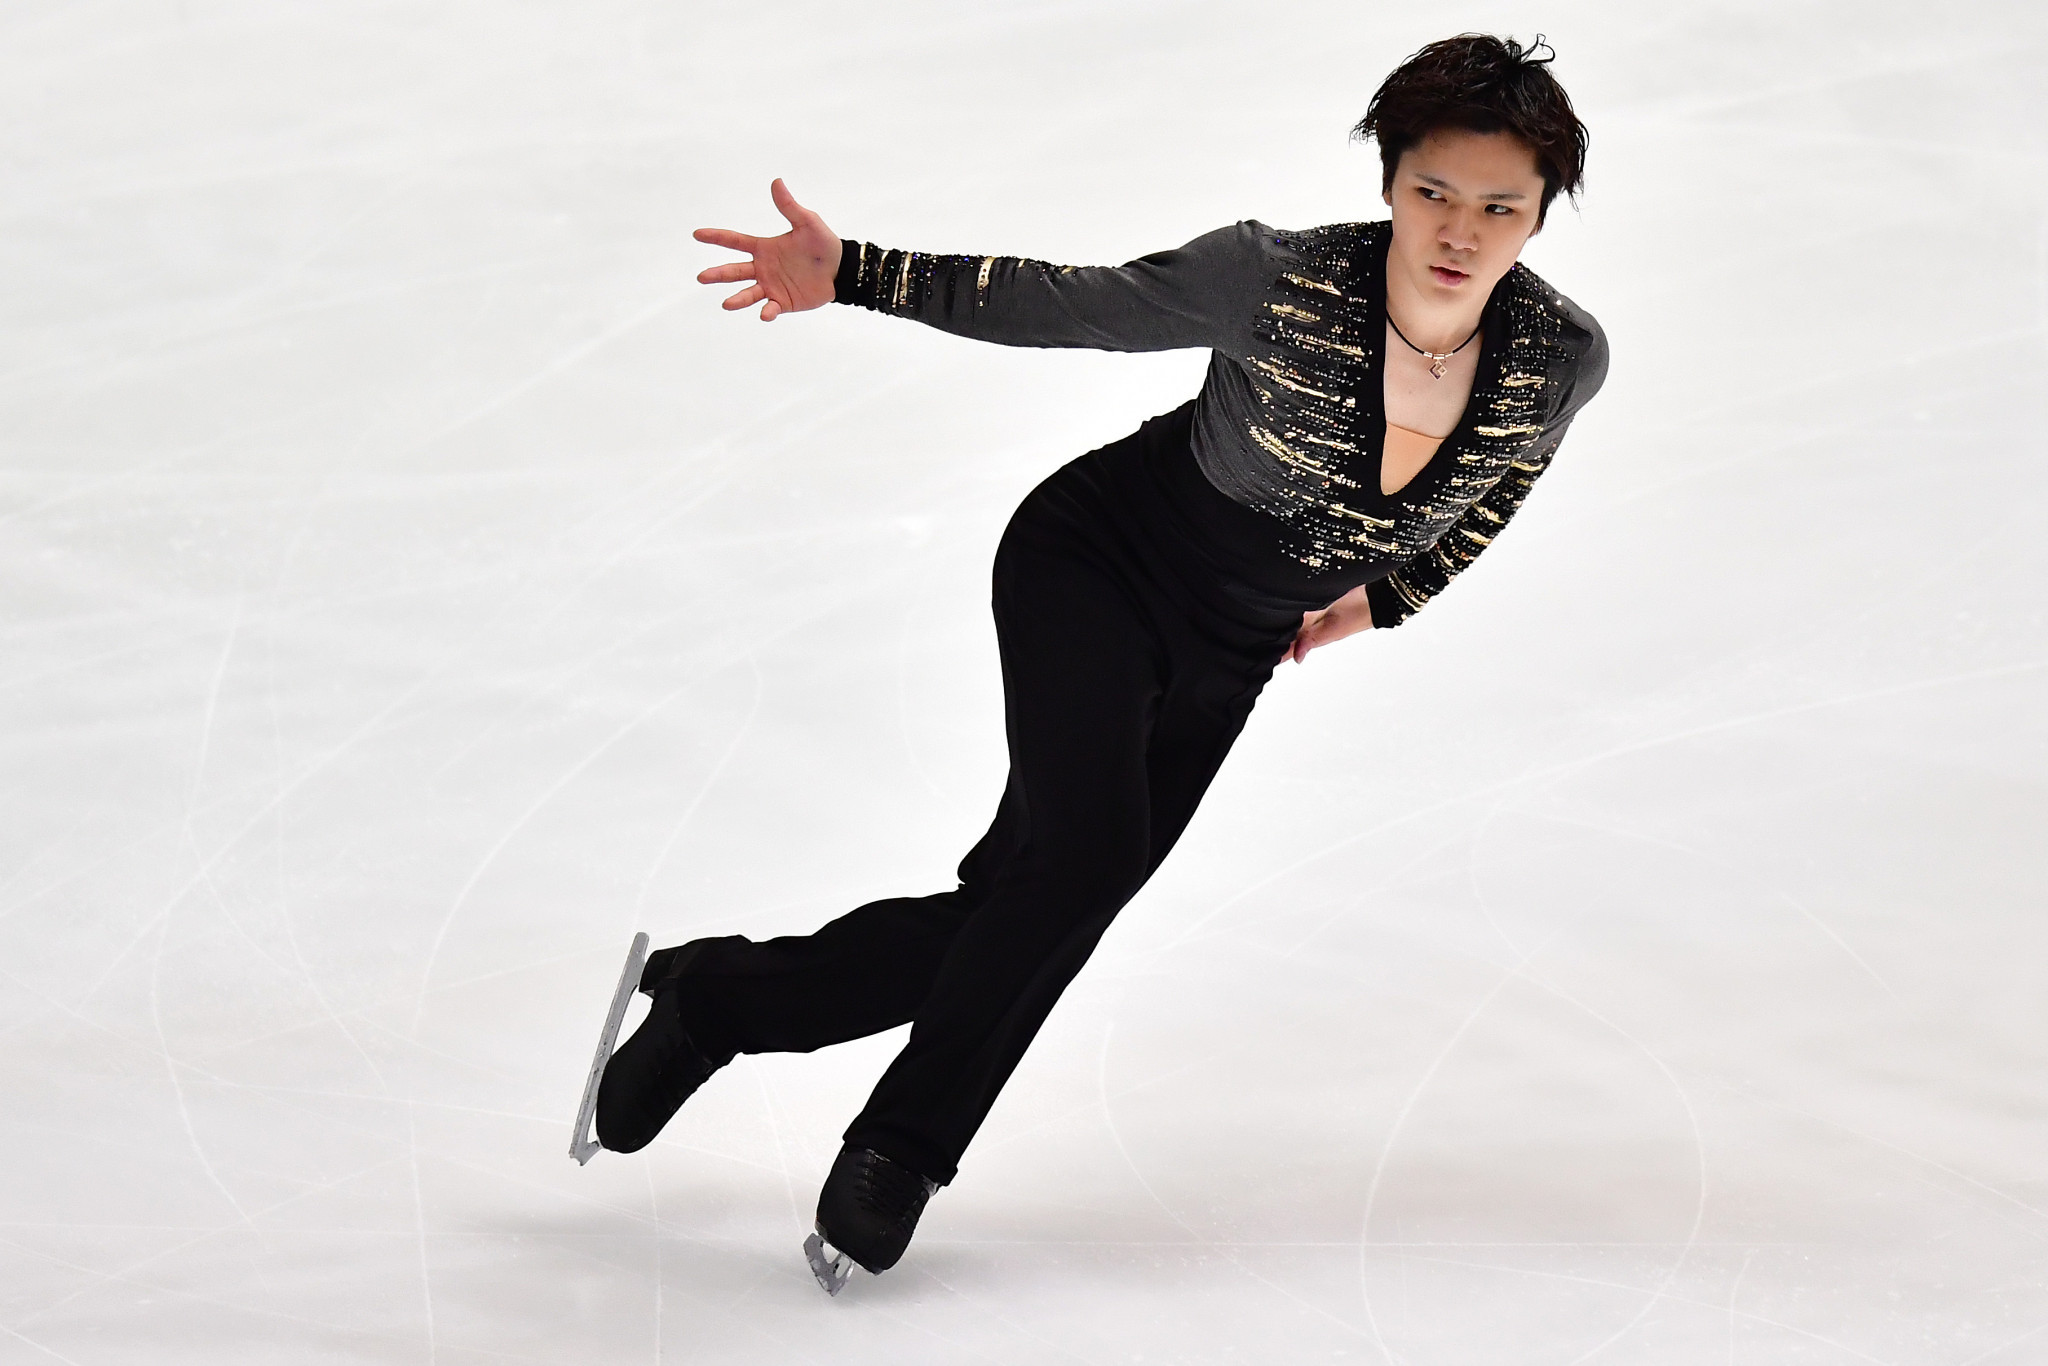 Shoma Uno will go for gold tomorrow when the ISU Four Continents Figure Skating Championships begins in Anaheim ©Getty Images